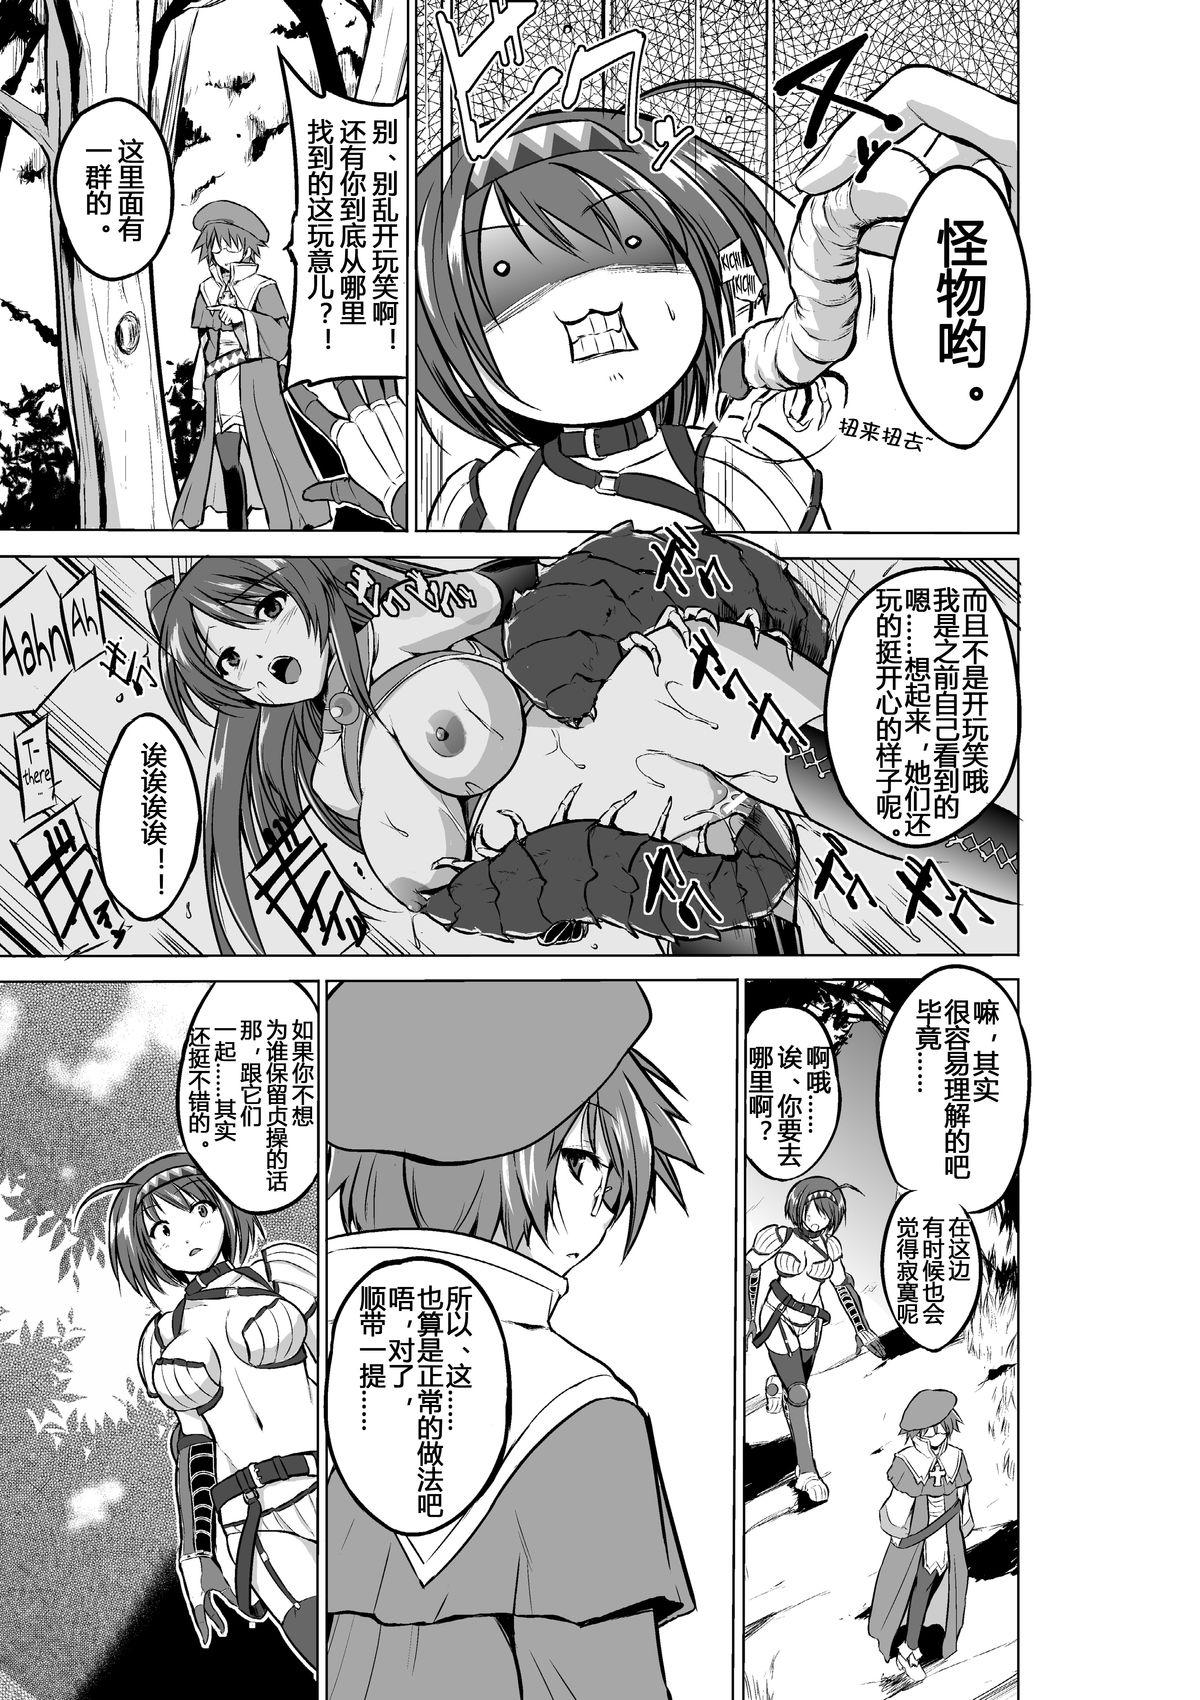 Lick Dungeon Travelers - Chie no Himegoto - Toheart2 Cosplay - Page 5